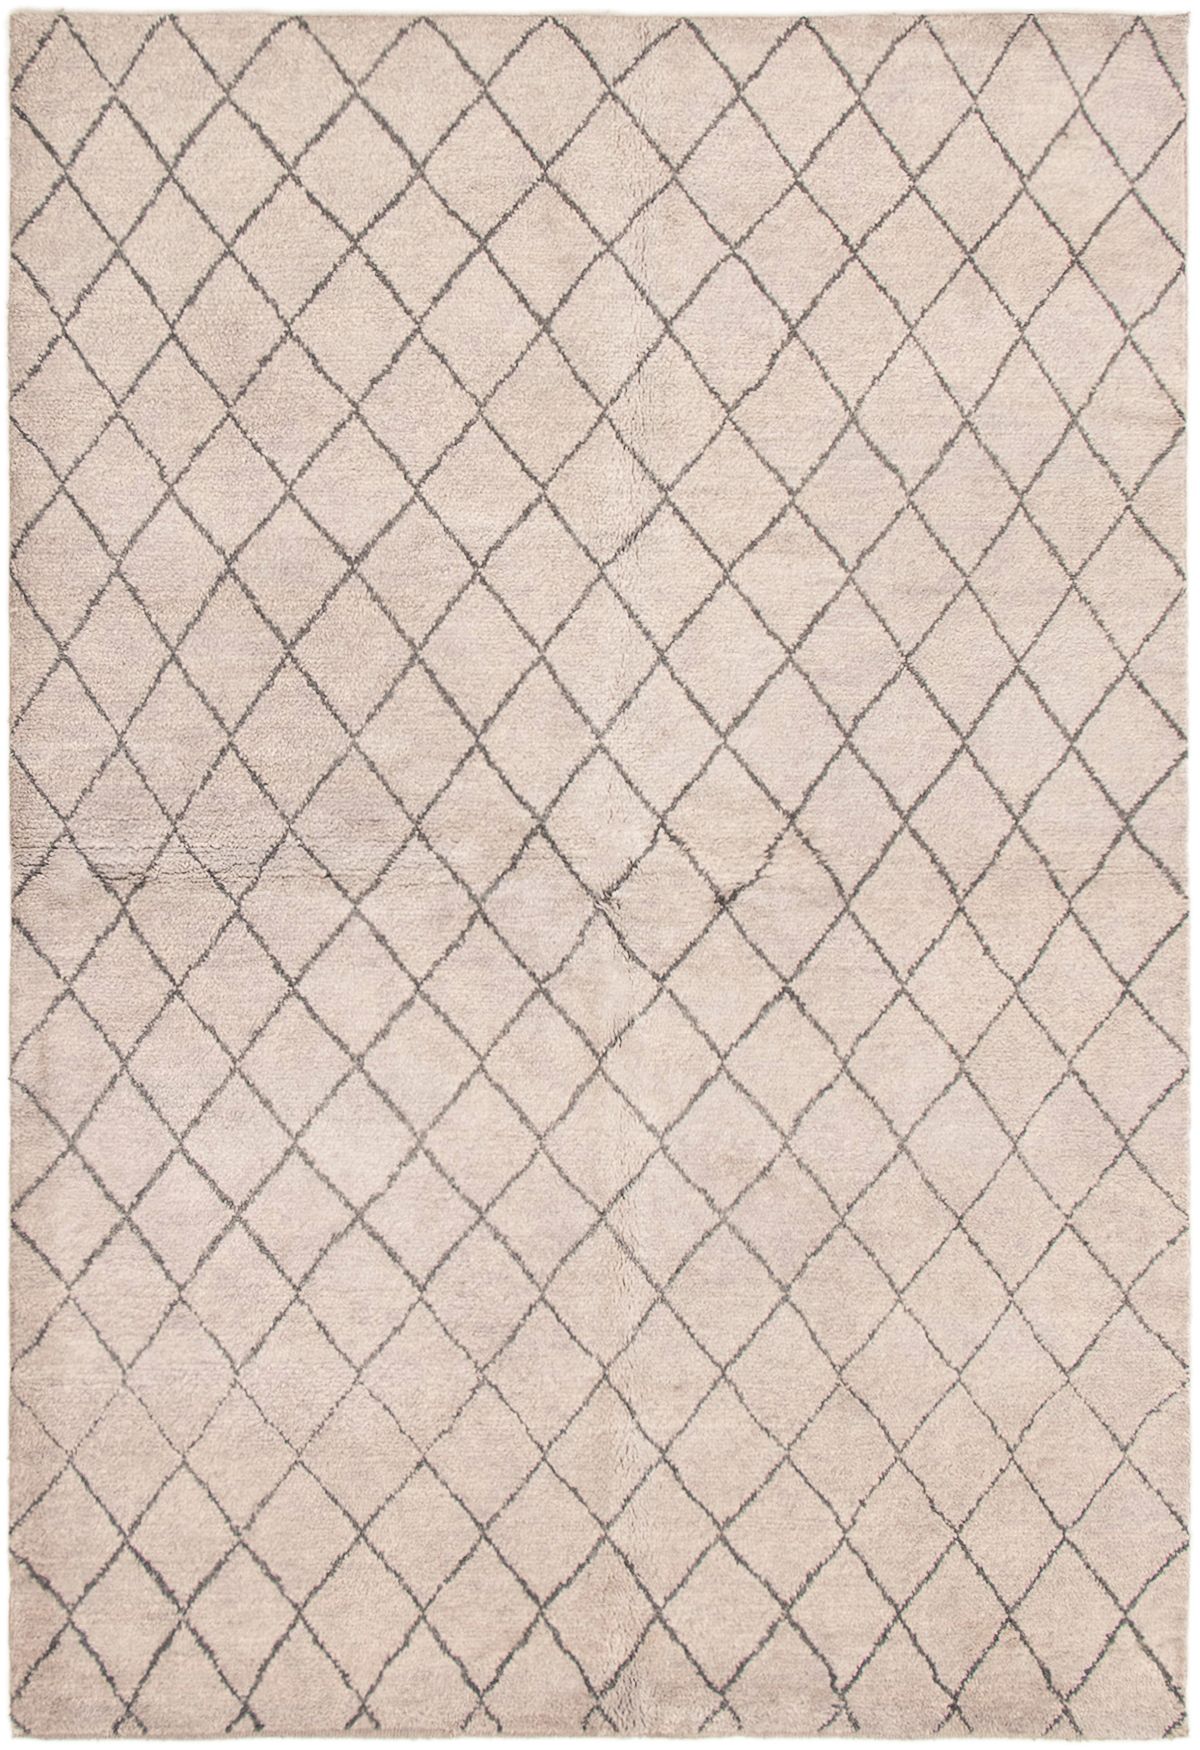 Hand-knotted Arlequin Light Grey Wool Rug 6'5" x 9'6" Size: 6'5" x 9'6"  